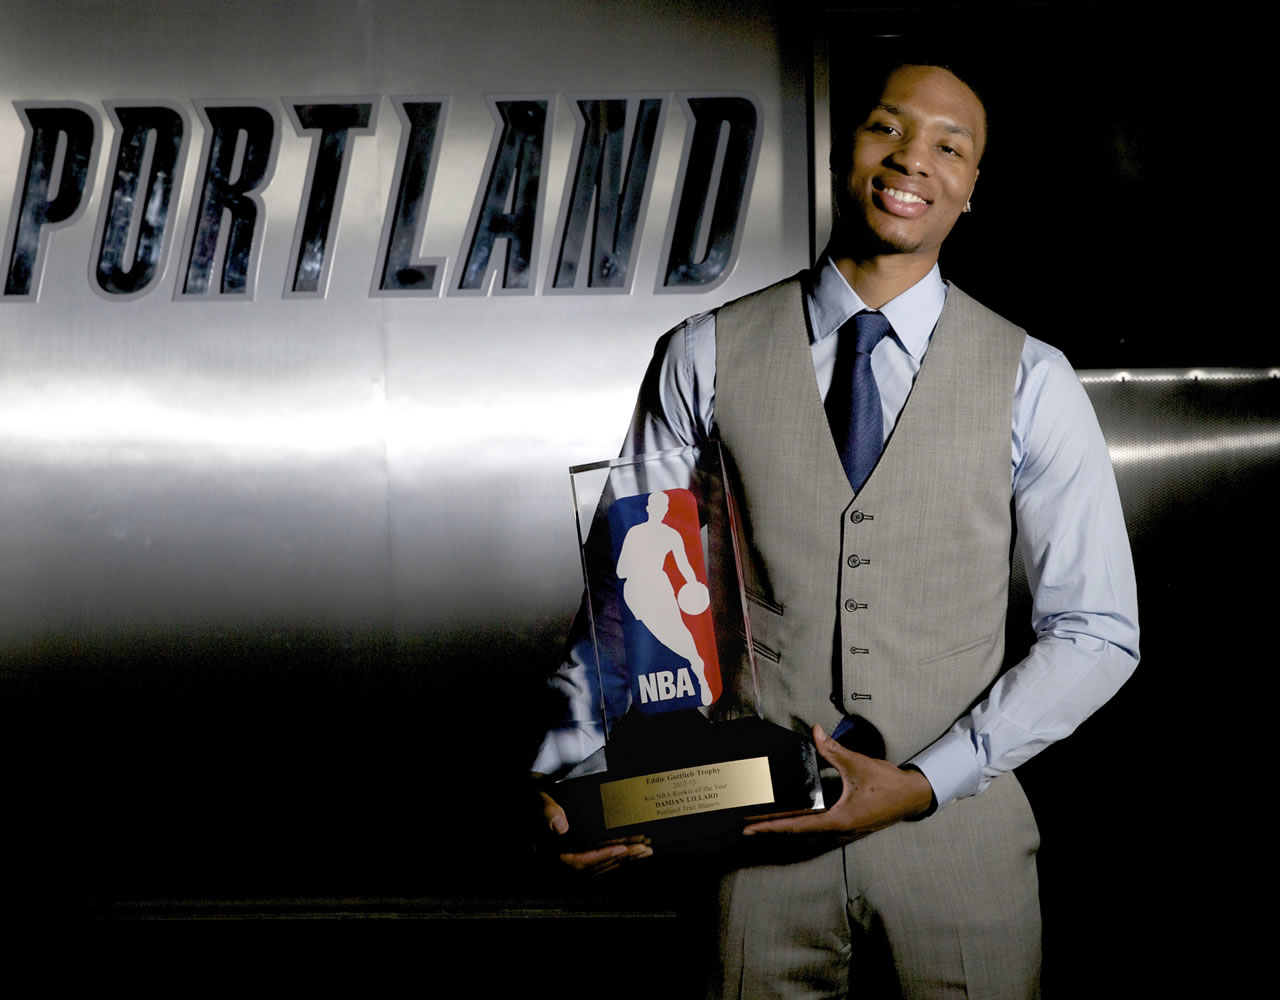 Portland Trail Blazers guard Damian Lillard poses with the trophy after being named NBA basketball's Rookie of the Year on Wednesday, May 1, 2013, in Portland, Ore. Lillard also swept all six of the league's Rookie of the Month awards this season.